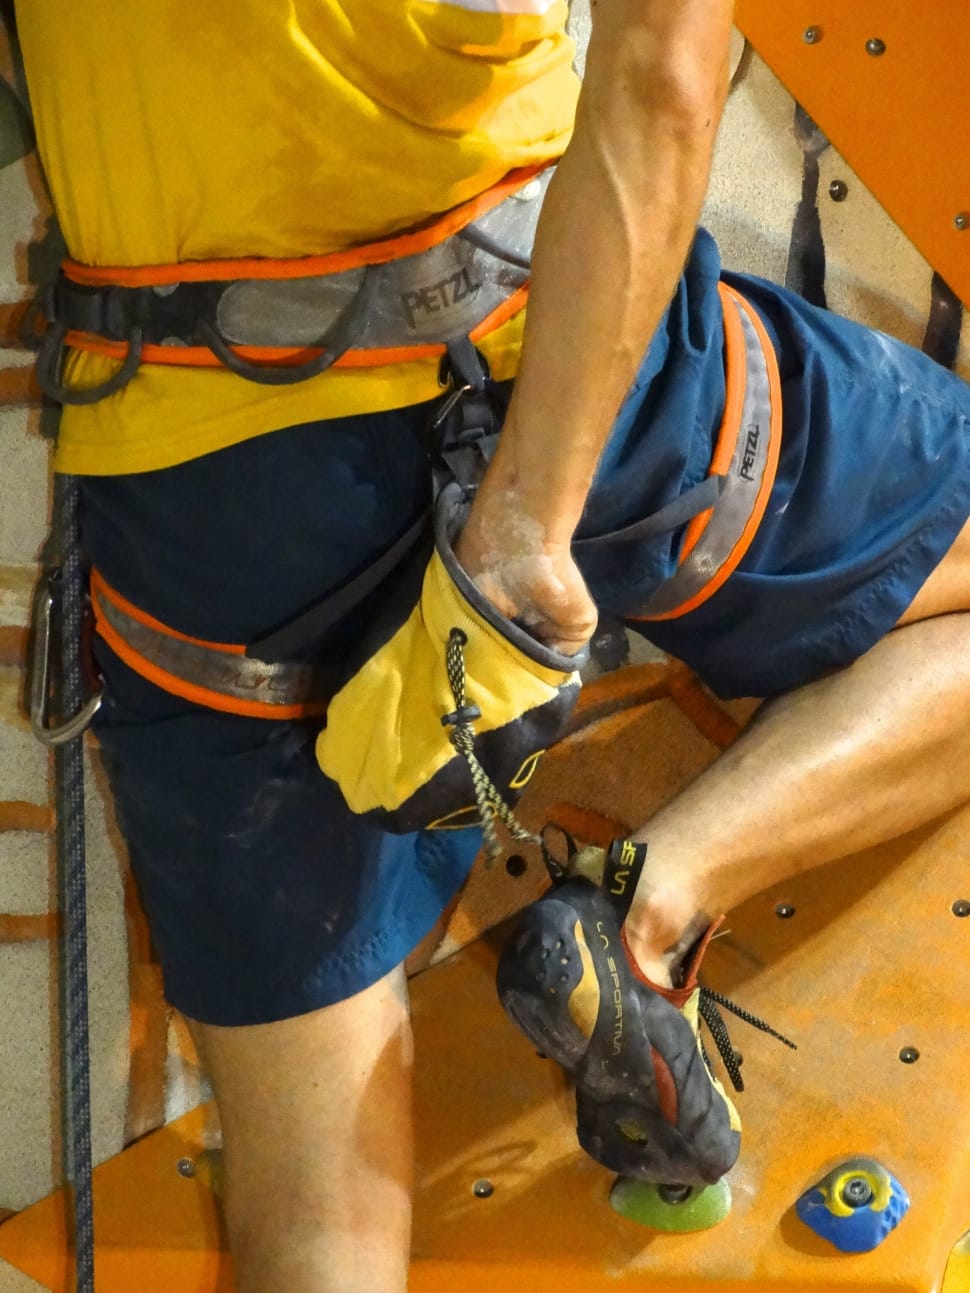 orange and gray Petzl harness preview